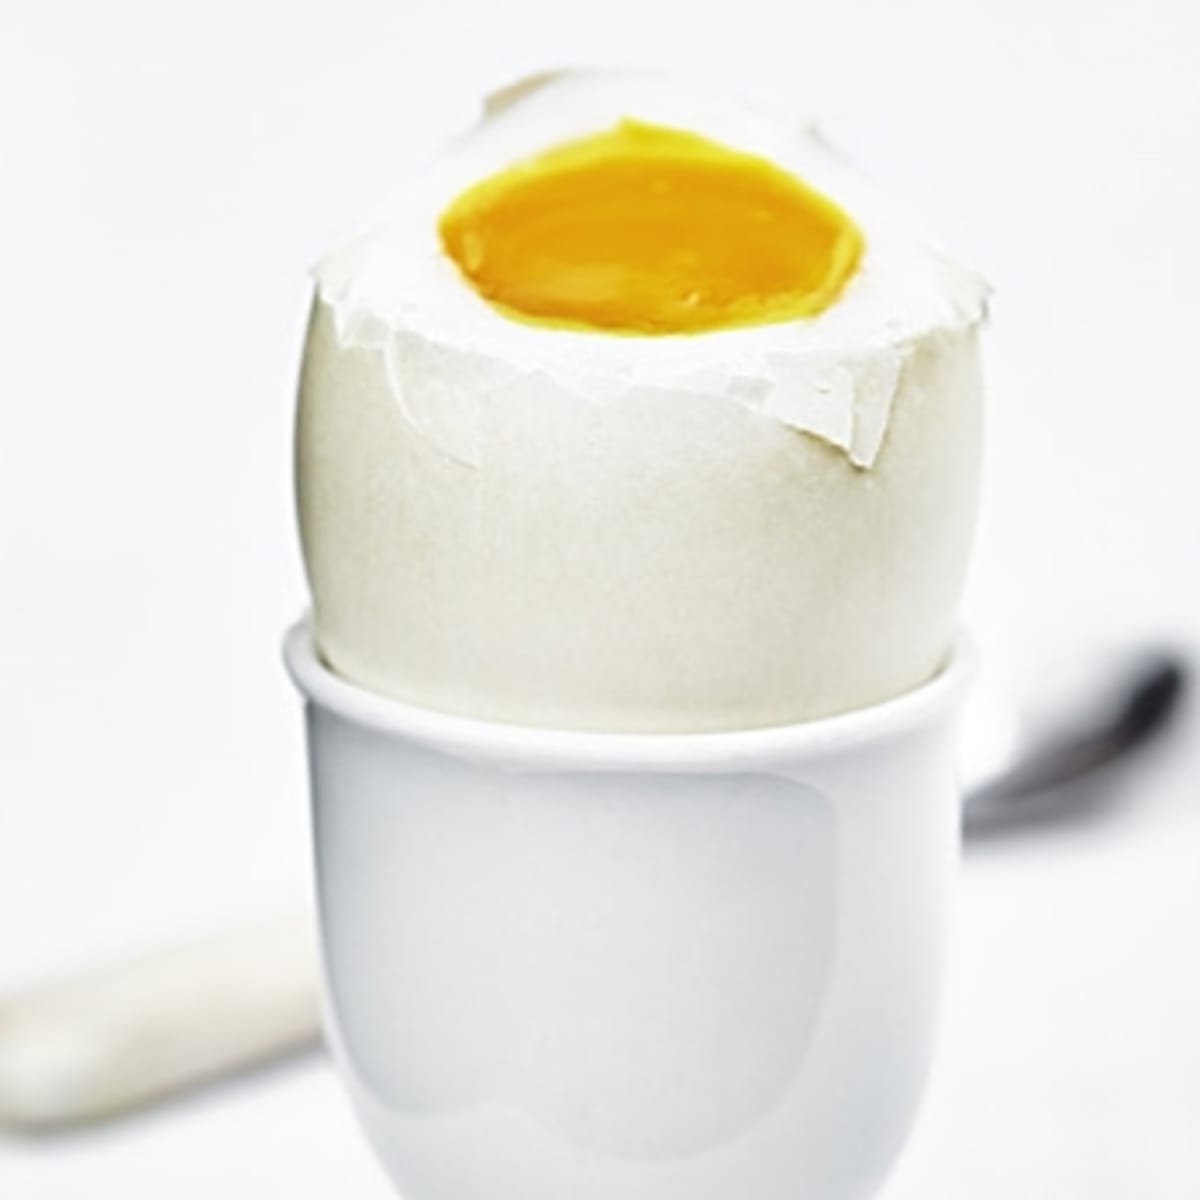 Egg over easy and sunny-side up - An How To from Mj's Kitchen